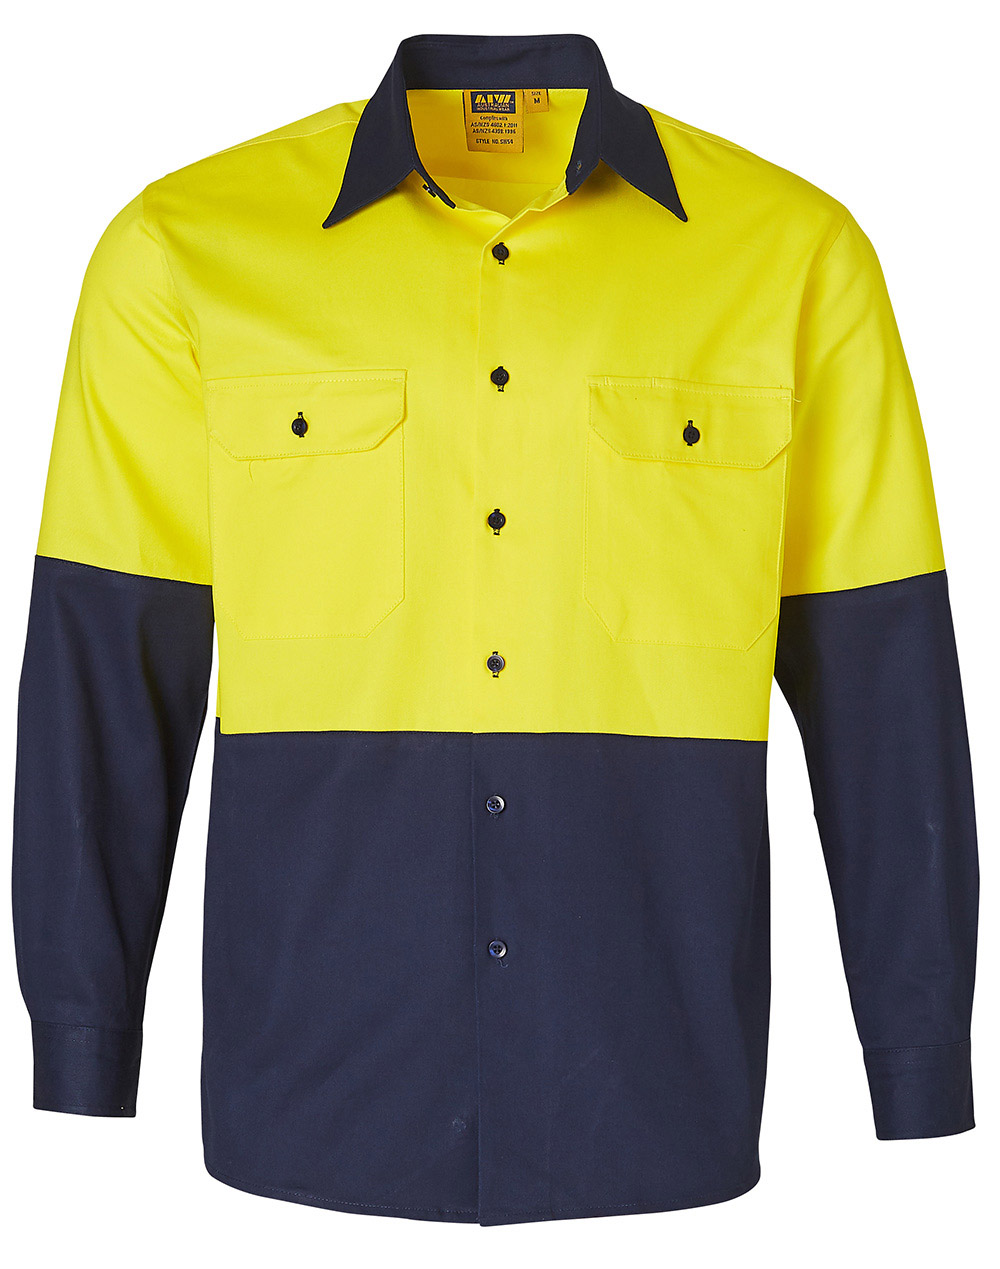 SW54 COTTON DRILL SAFETY SHIRT